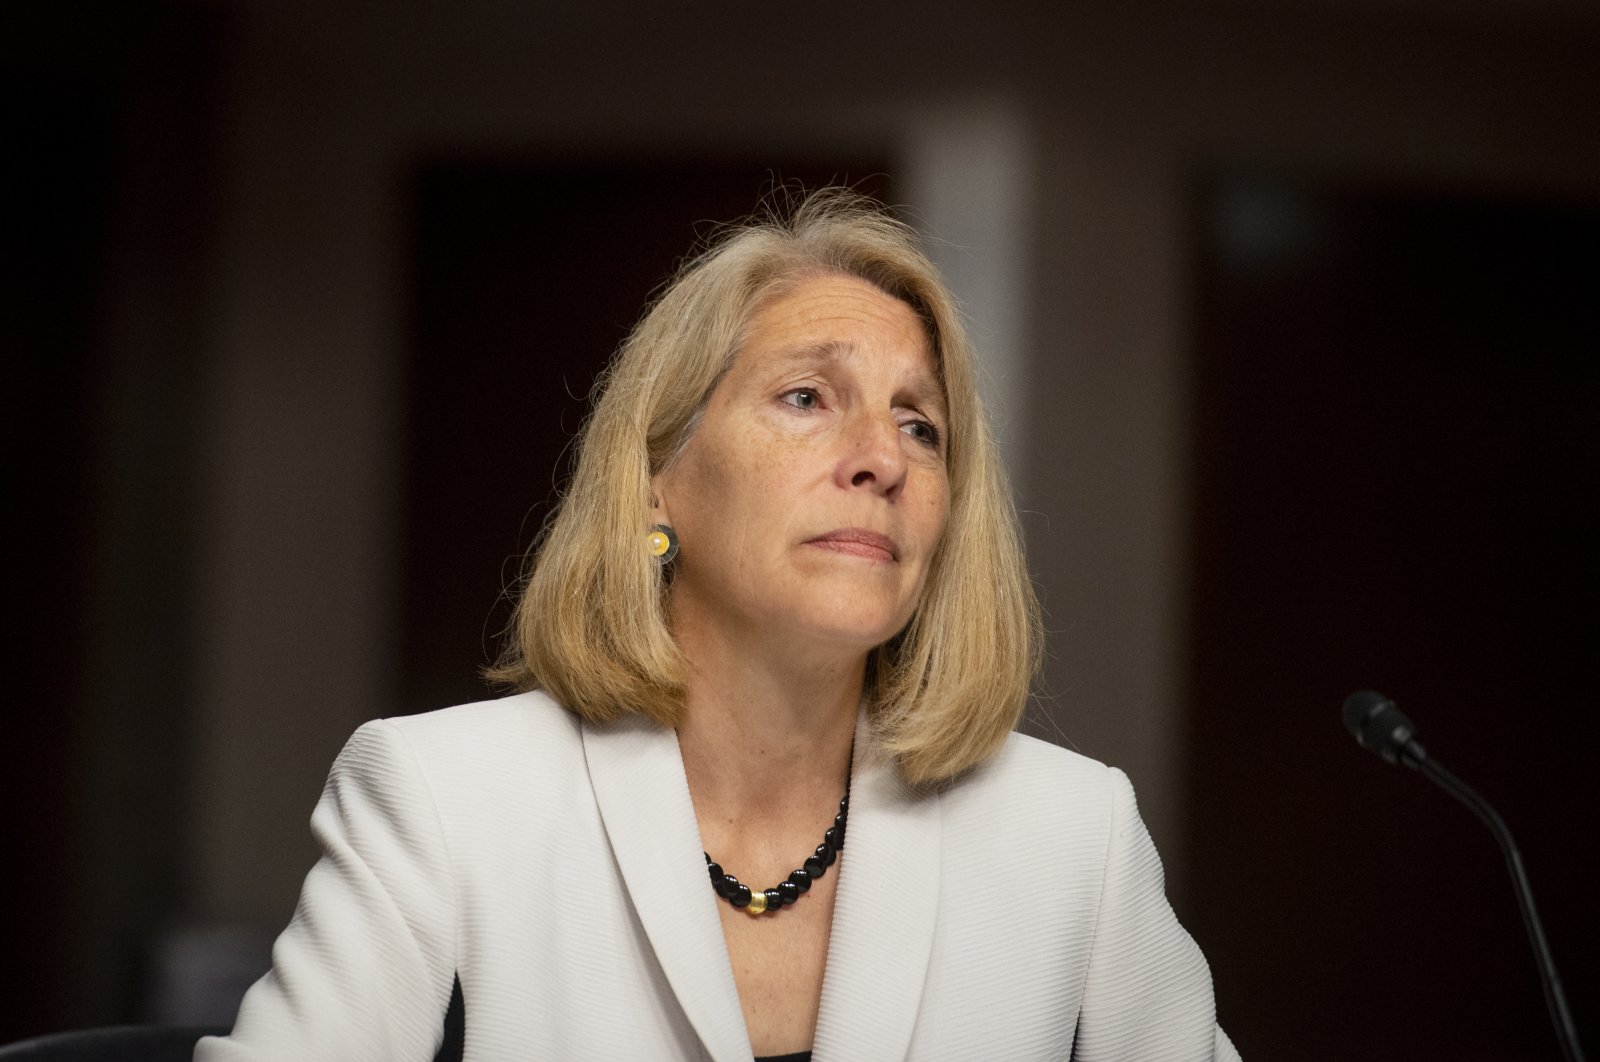 Dr. Karen Donfried appears before a Senate Committee on Foreign Relations hearing for her nomination to be an Assistant Secretary of State, in the Dirksen Senate Office Building in Washington, D.C., U.S., July 20, 2021. (Reuters Photo)